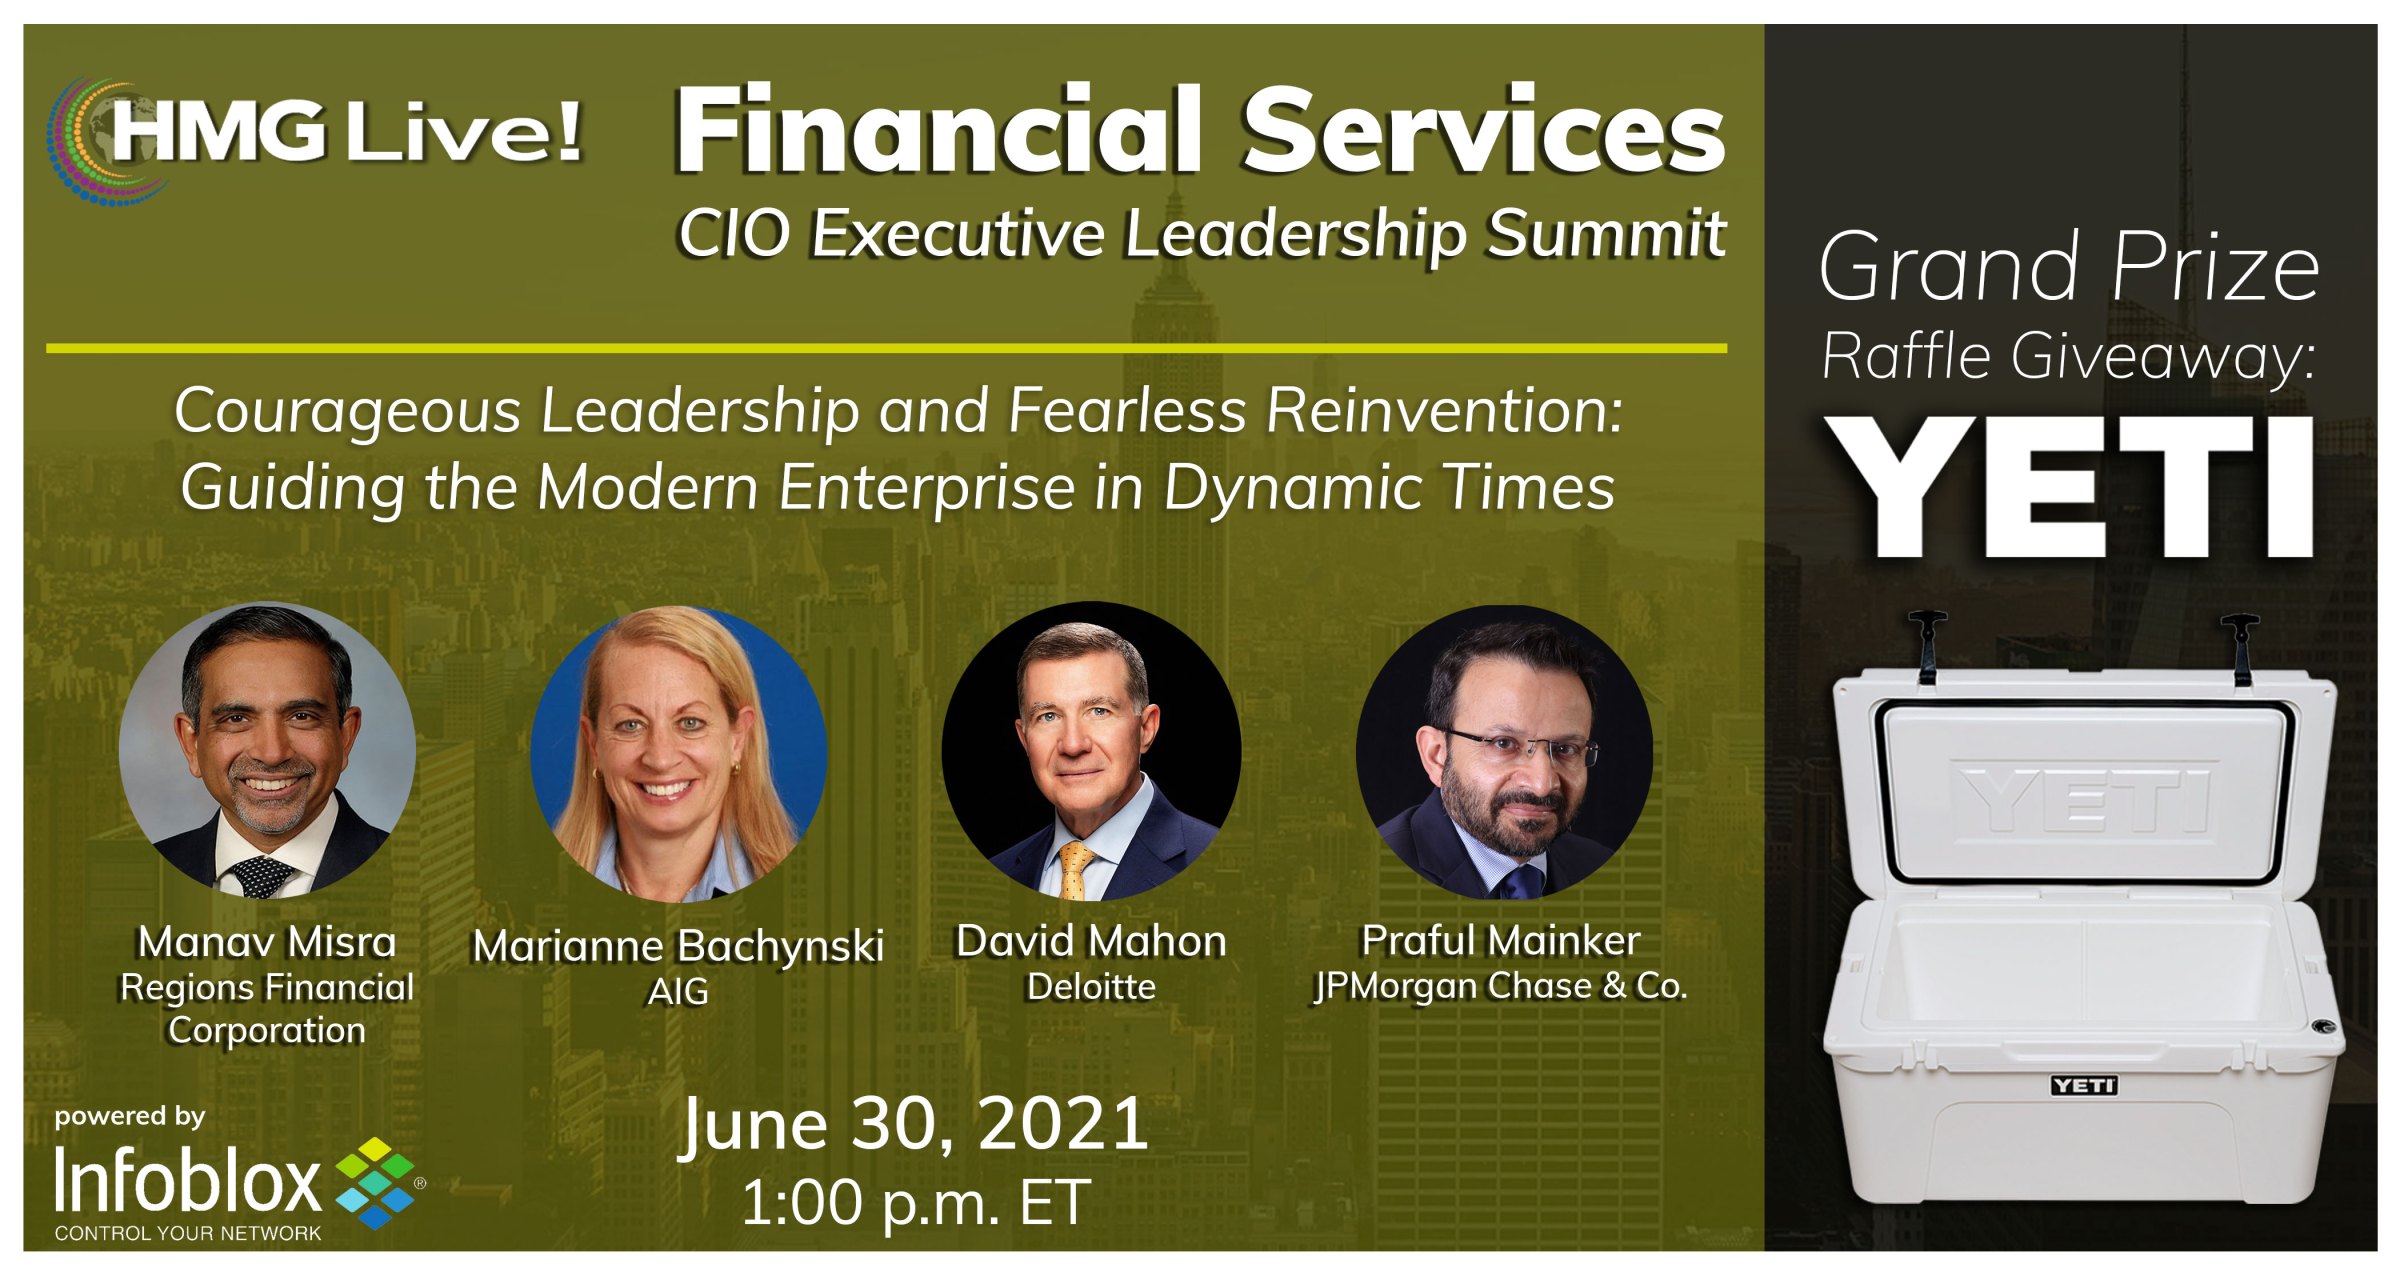 CIO Leadership: Cultivating a Connected Culture That Embraces Diversity, Equity & Inclusion Will Power the Discussion at the 2021 HMG Live! Financial Services CIO Executive Leadership Summit on June 30